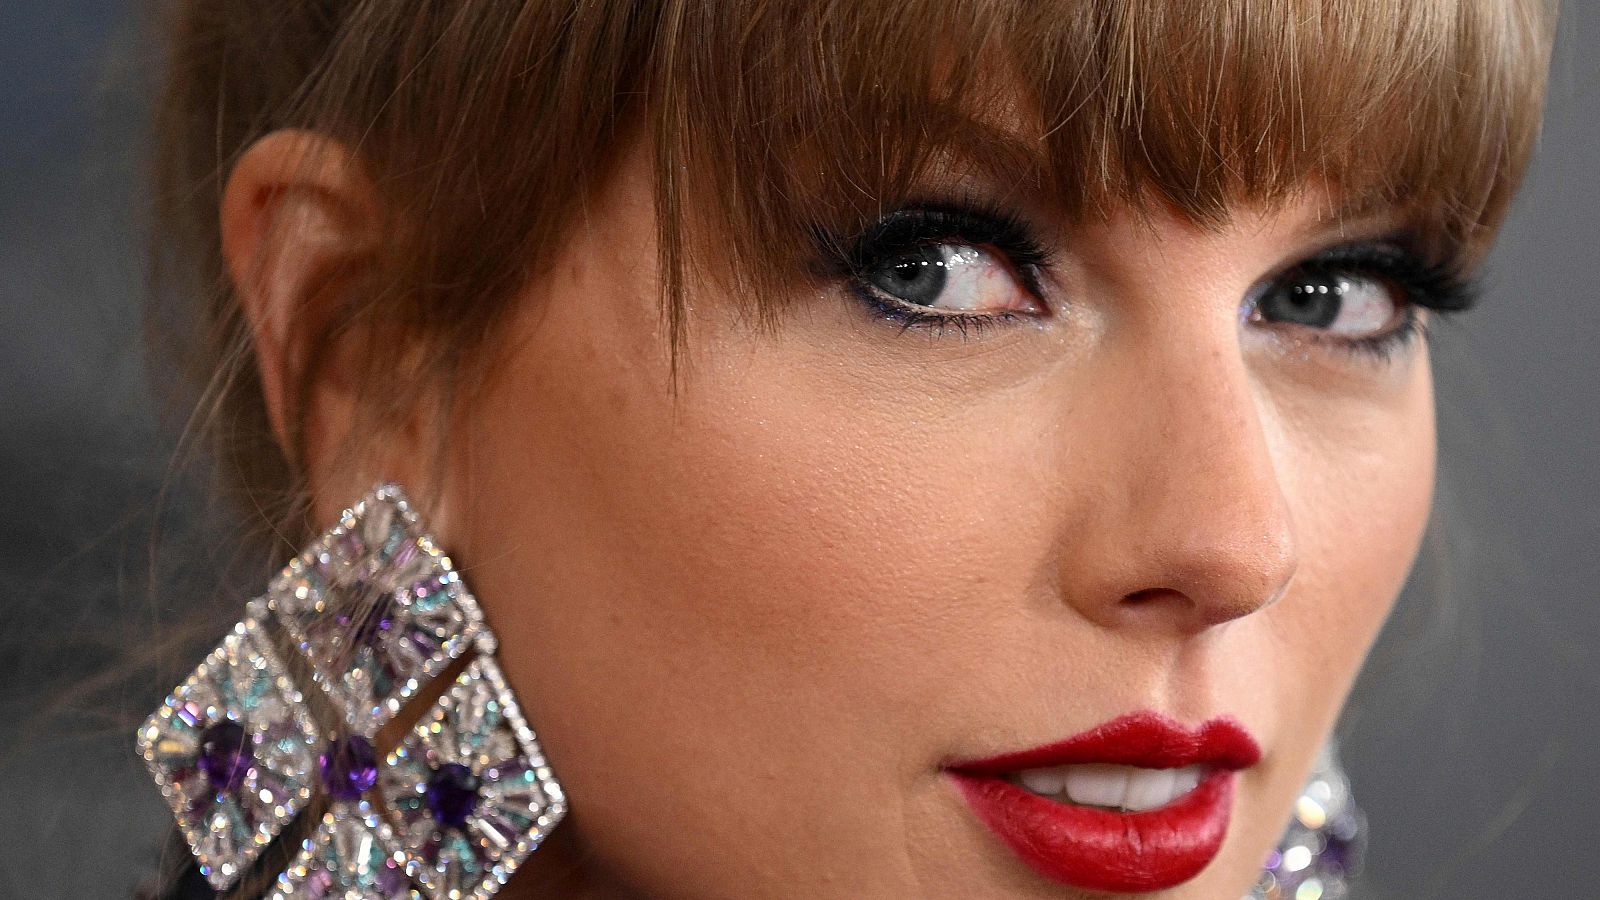 Taylor Swift publica nuevo disco 'The Tortured Poets Department'